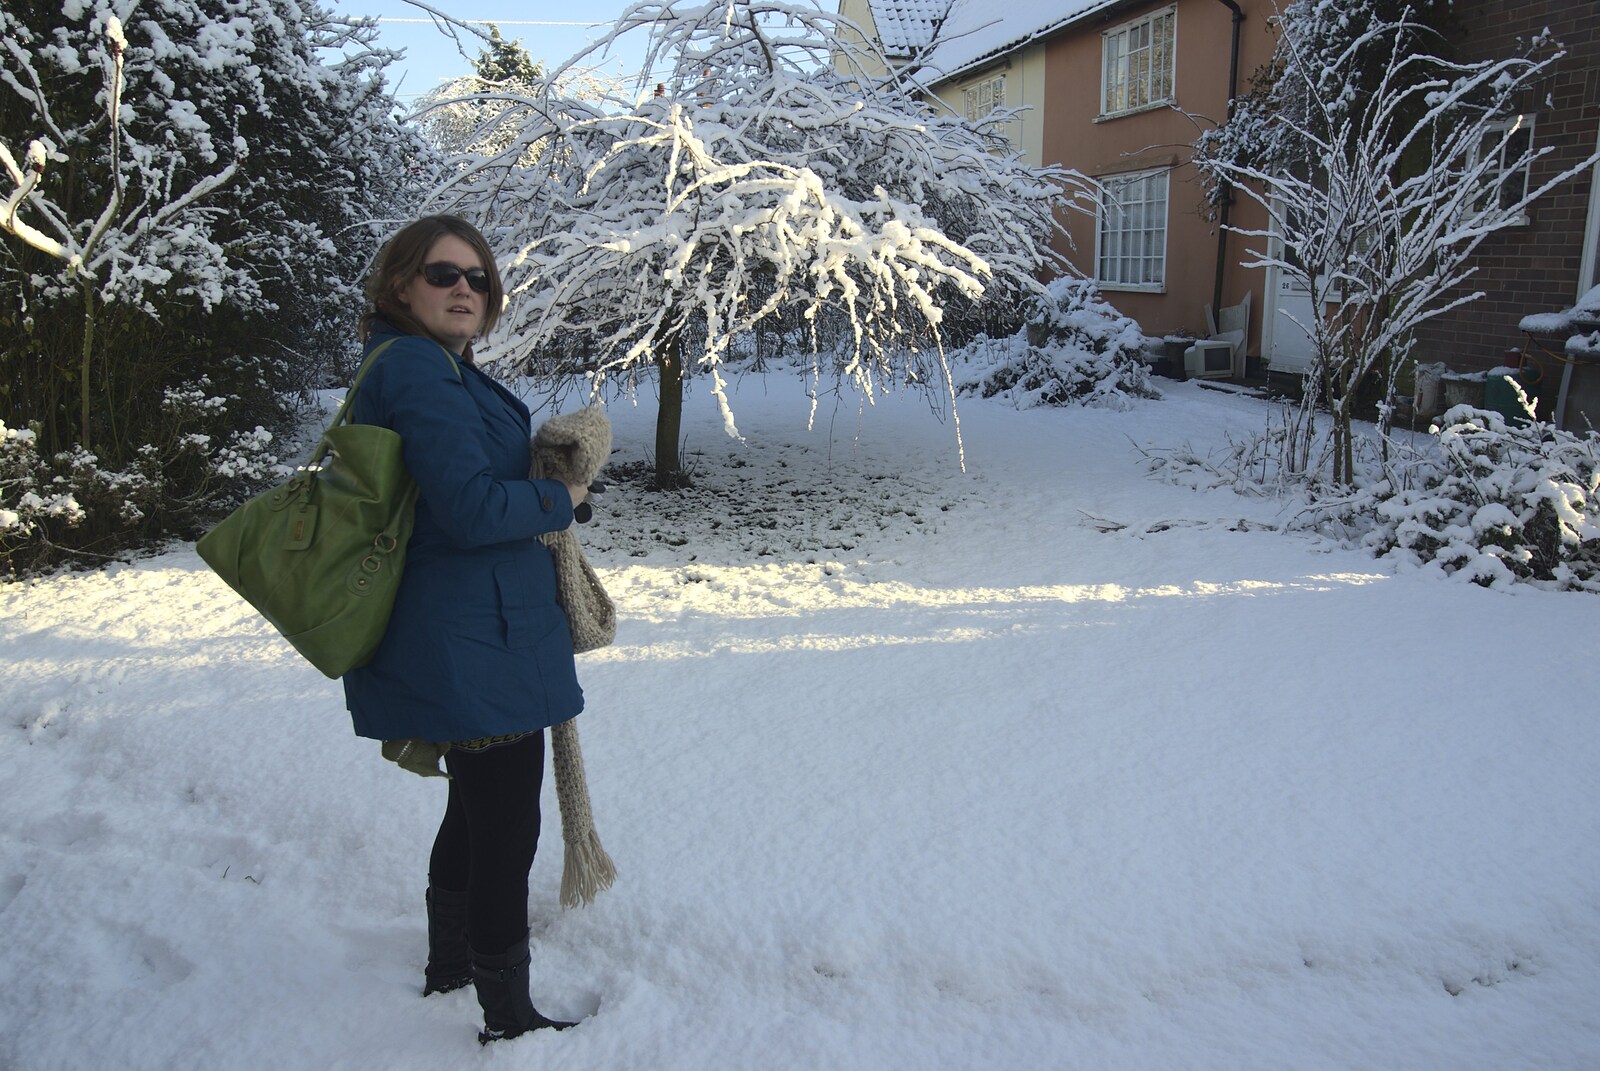 Isobel in the garden back home from A Qualcomm Christmas and Festive Snow, Hotel Felix, Cambridge - 17th December 2009